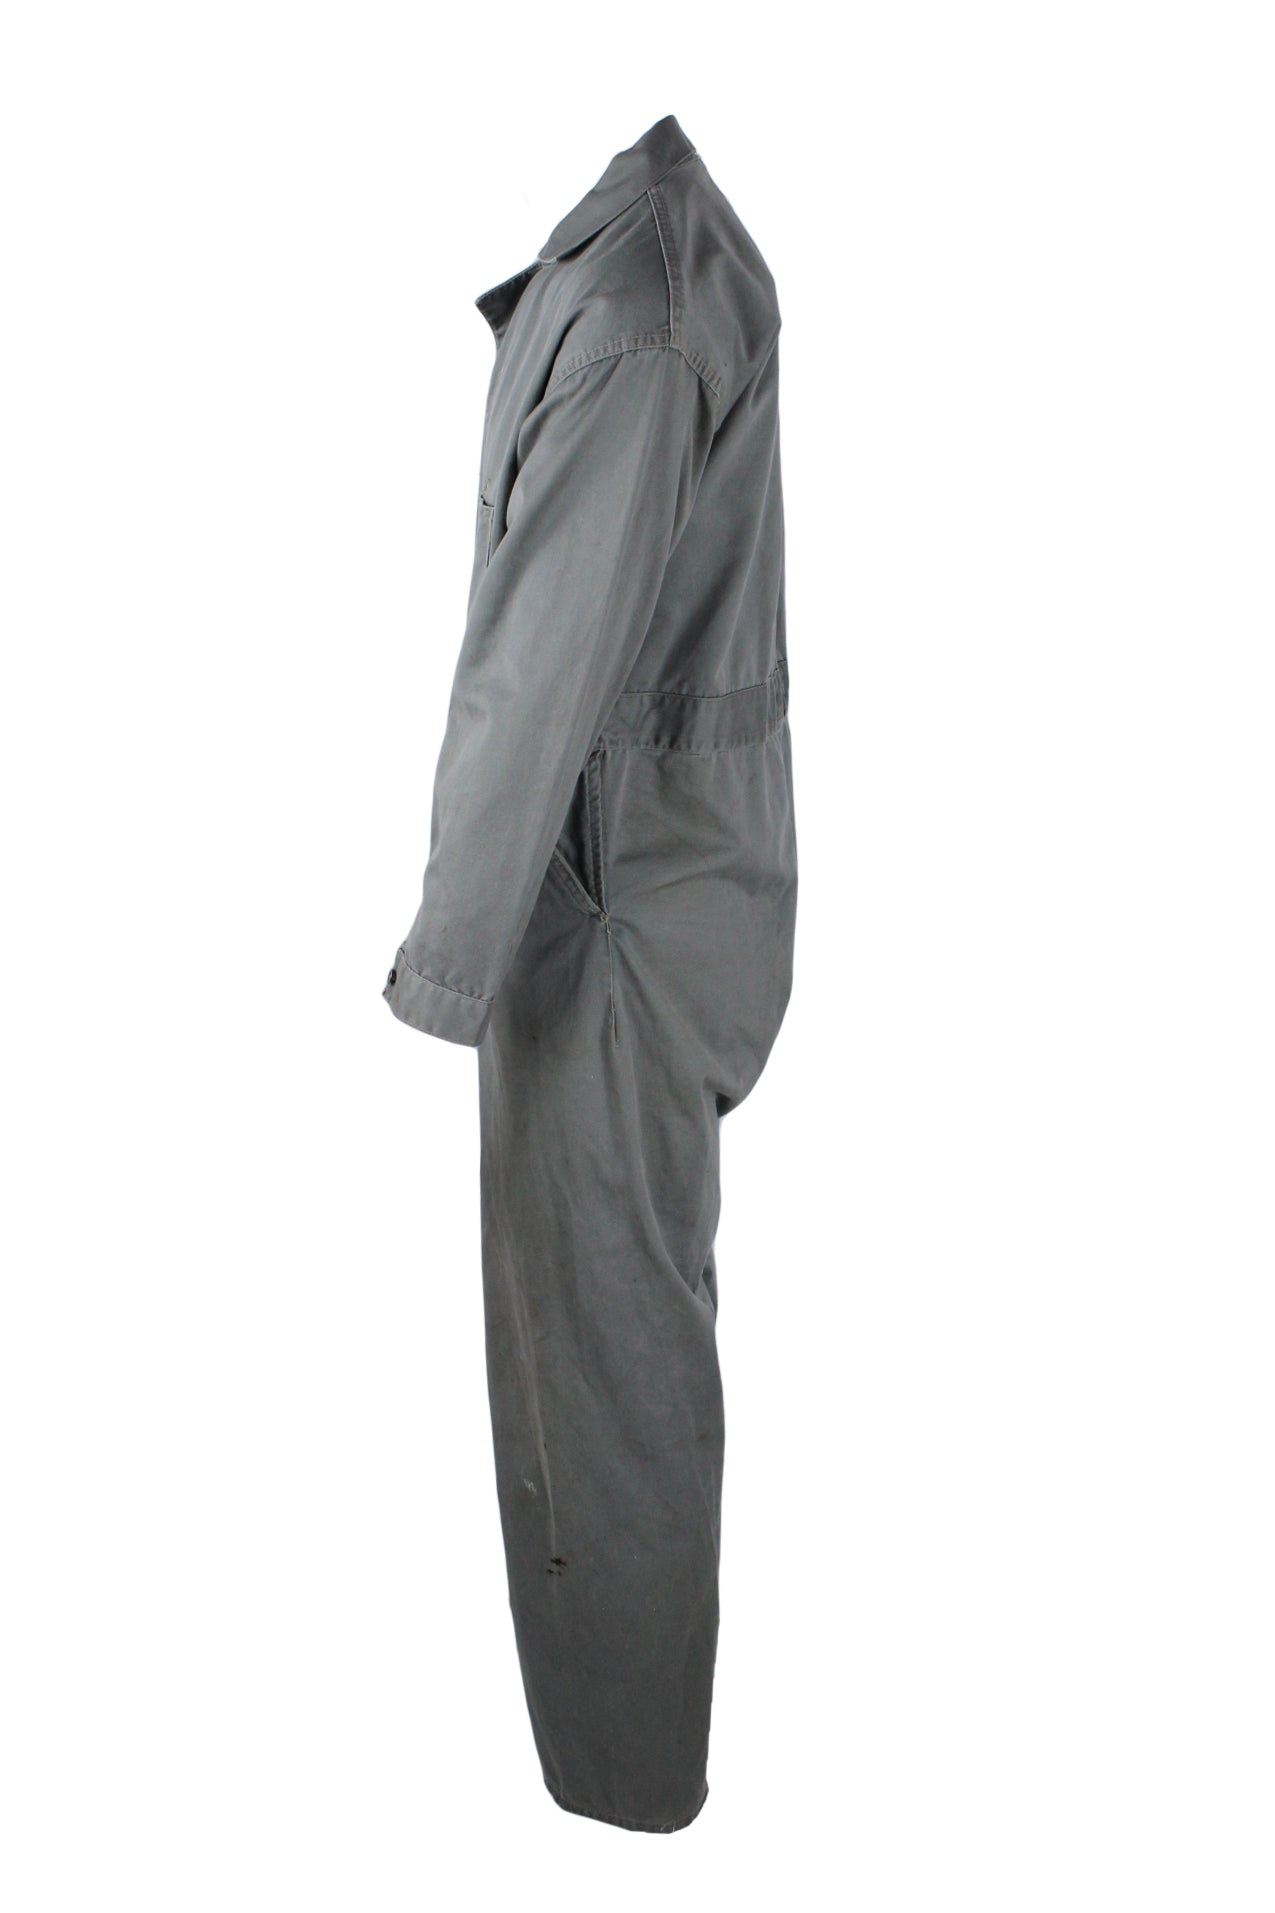 profile view with left sleeve and pocket of coveralls.